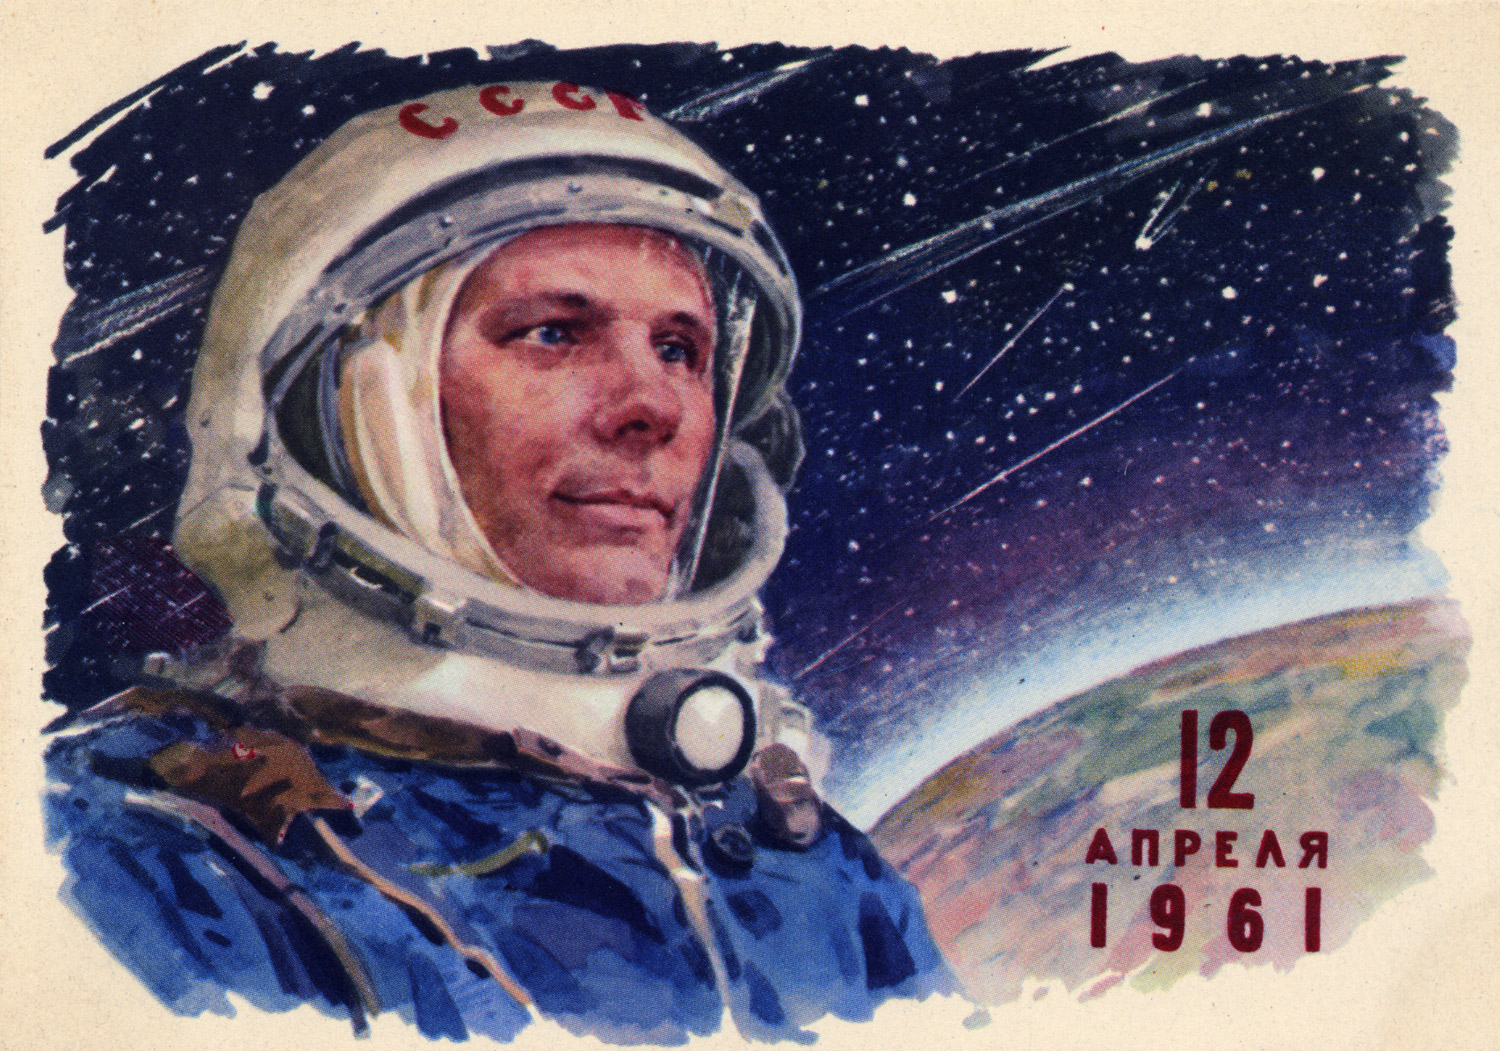 Bearing the date of Gagarin's orbit, this card was published a few weeks after his triumph.